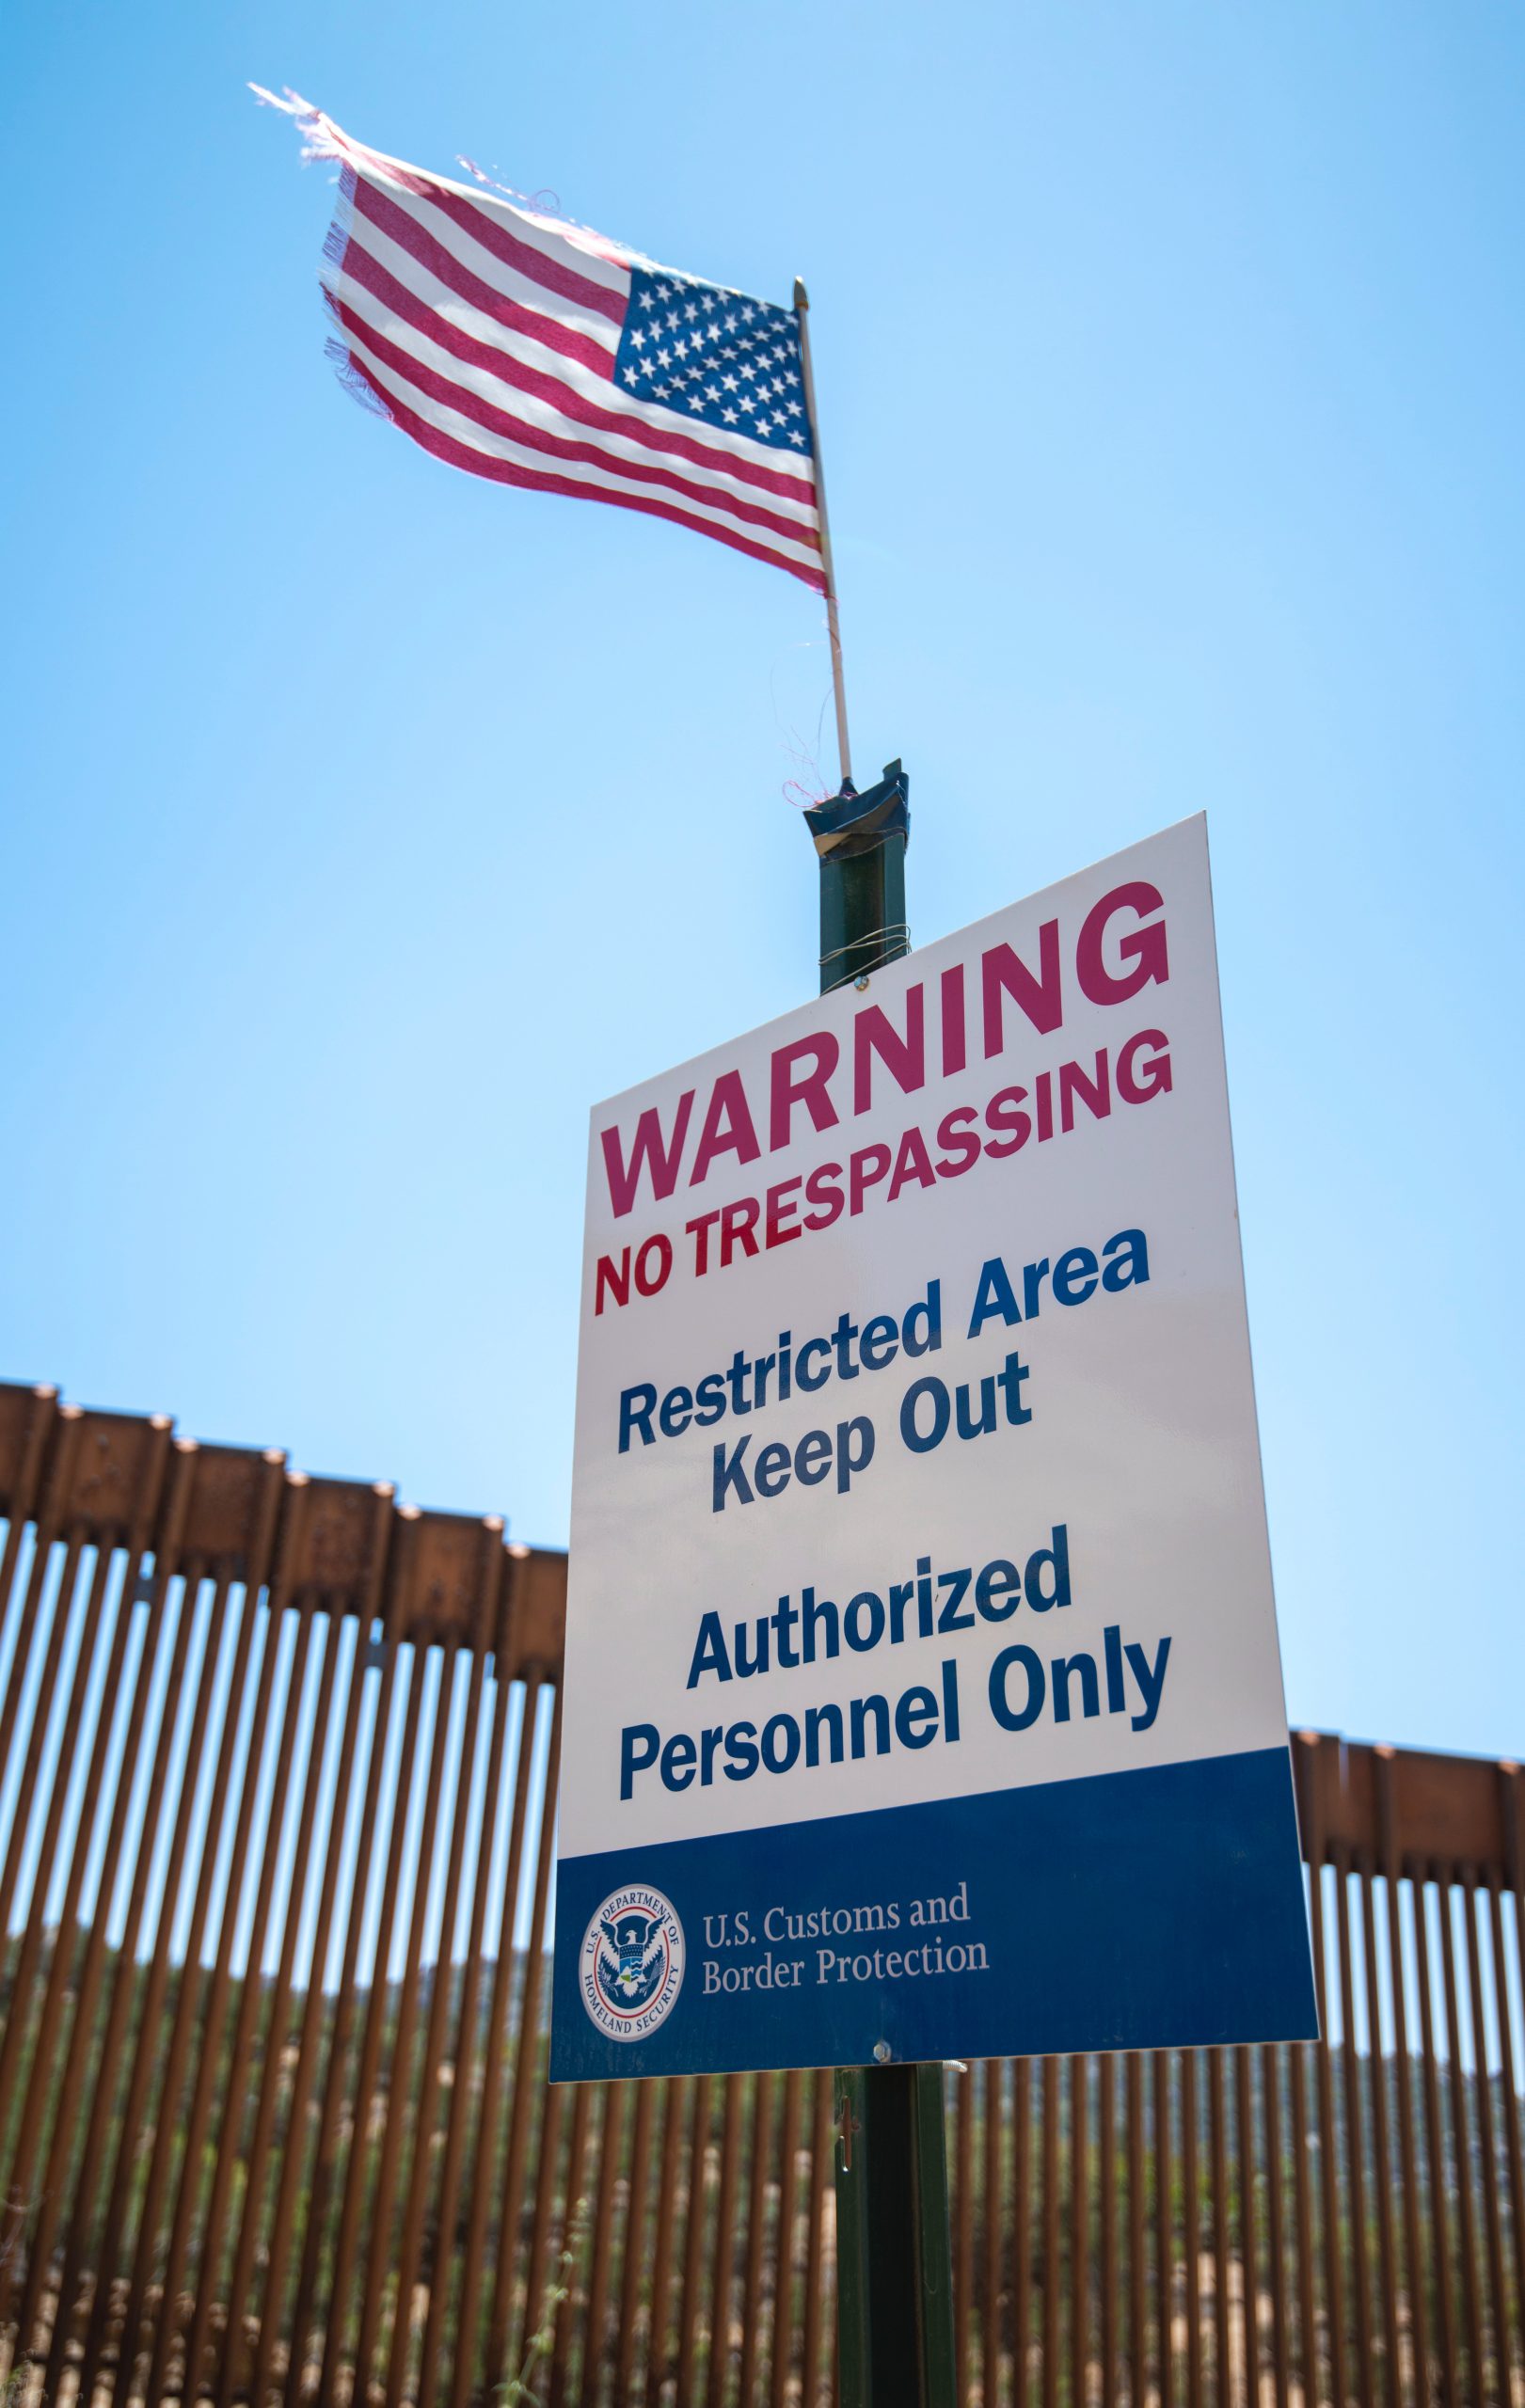 DHS Releases Travel Restrictions for Certain Unvaccinated Non-citizens at Land Ports of Entry Between the U.S. border with Canada and Mexico